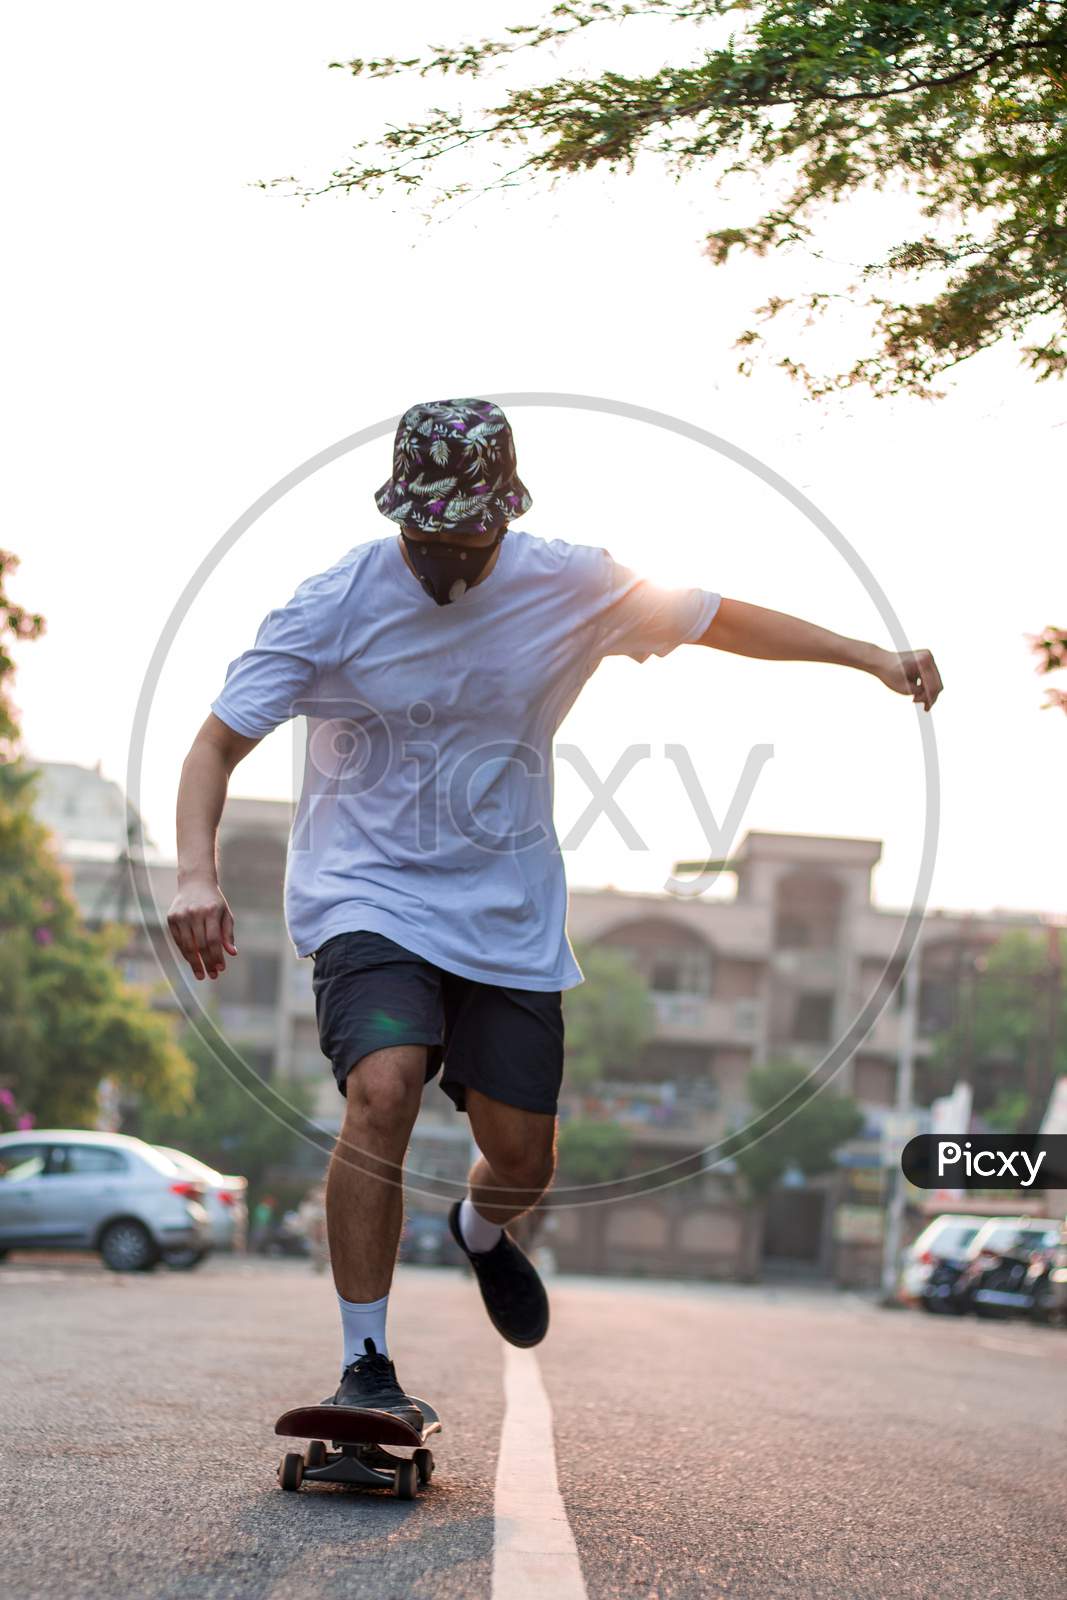 Front View Of A Young Adult Skateboarding On An Empty Street While Wearing A Protective Mask During Sunrise.